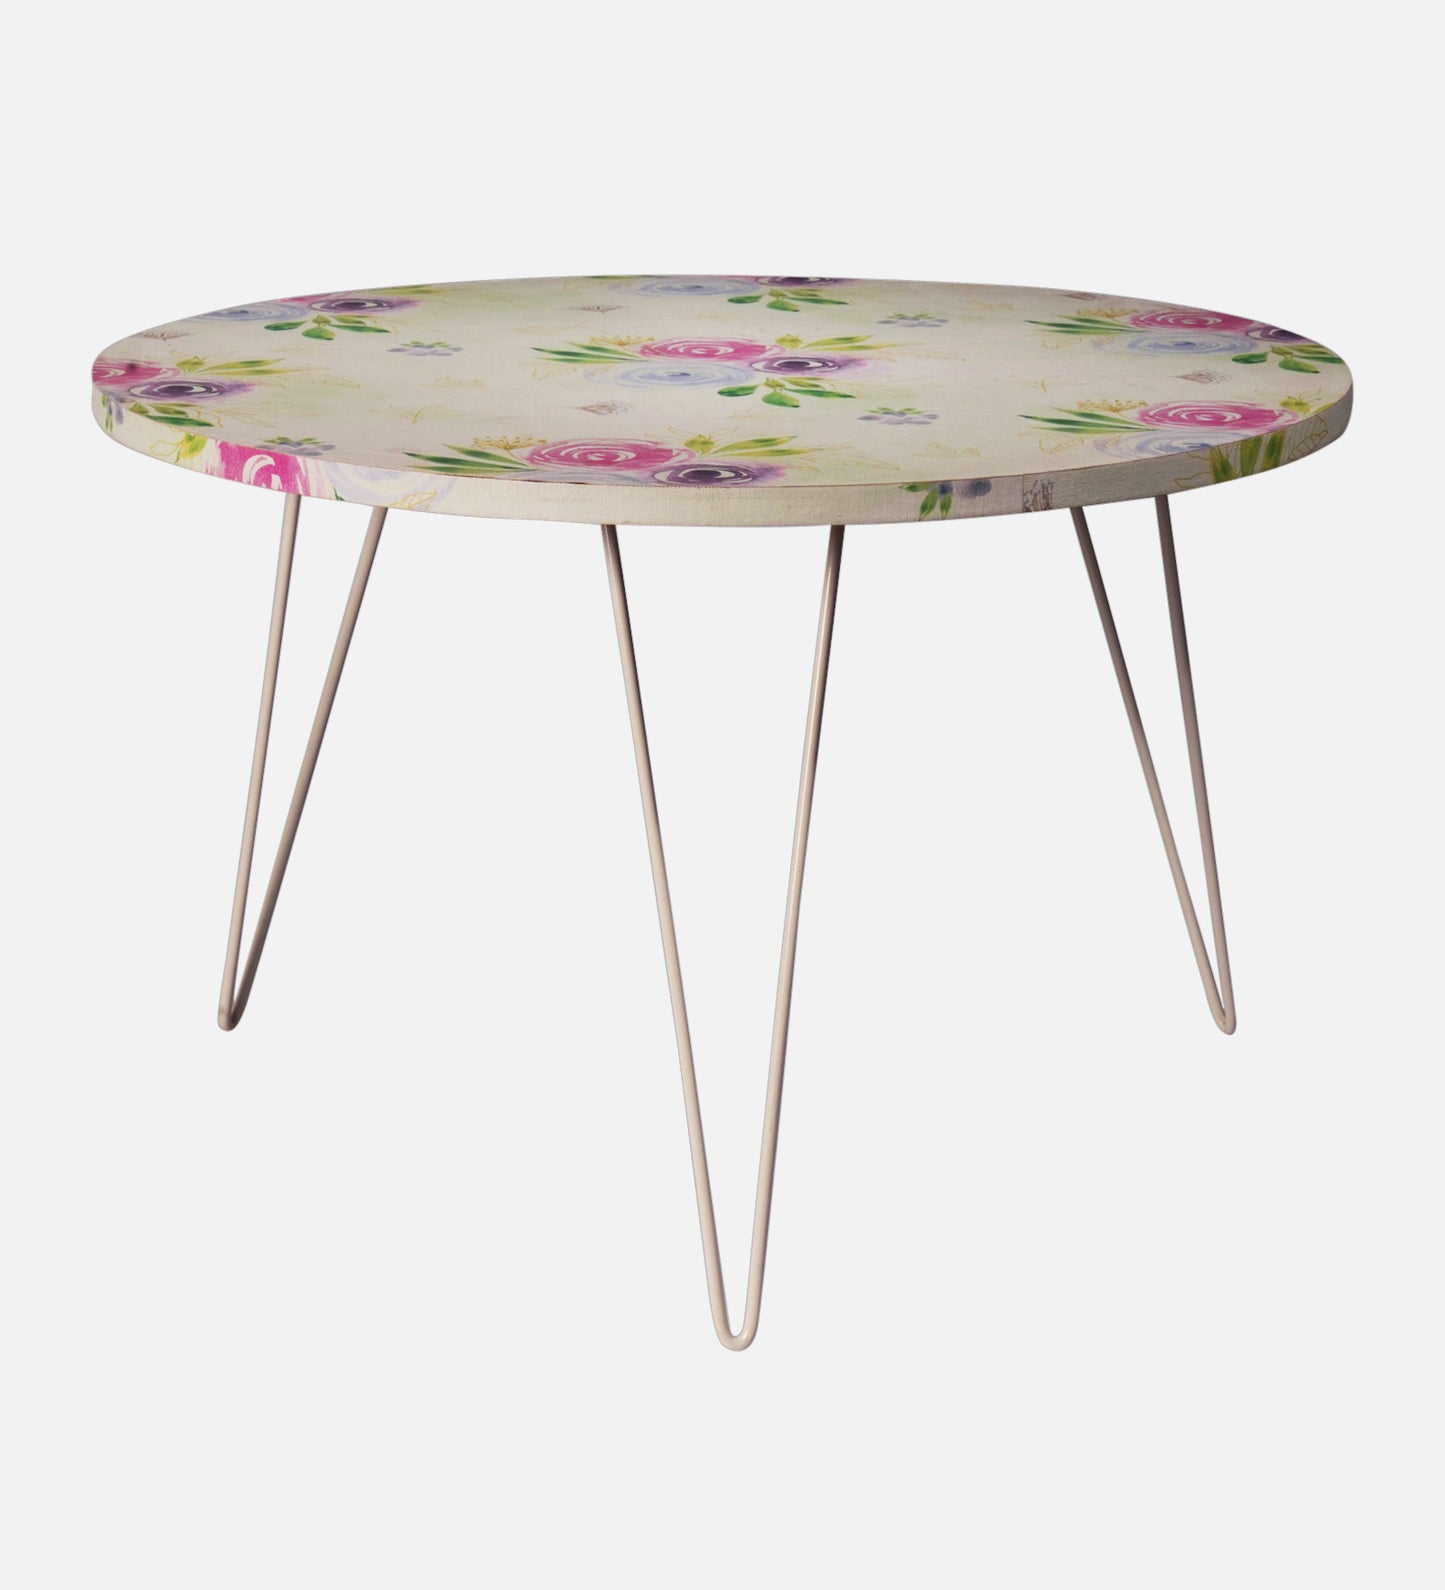 Blush Roses Round Coffee Tables, Wooden Tables, Coffee Tables, Center Tables, Living Room Decor by A Tiny Mistake